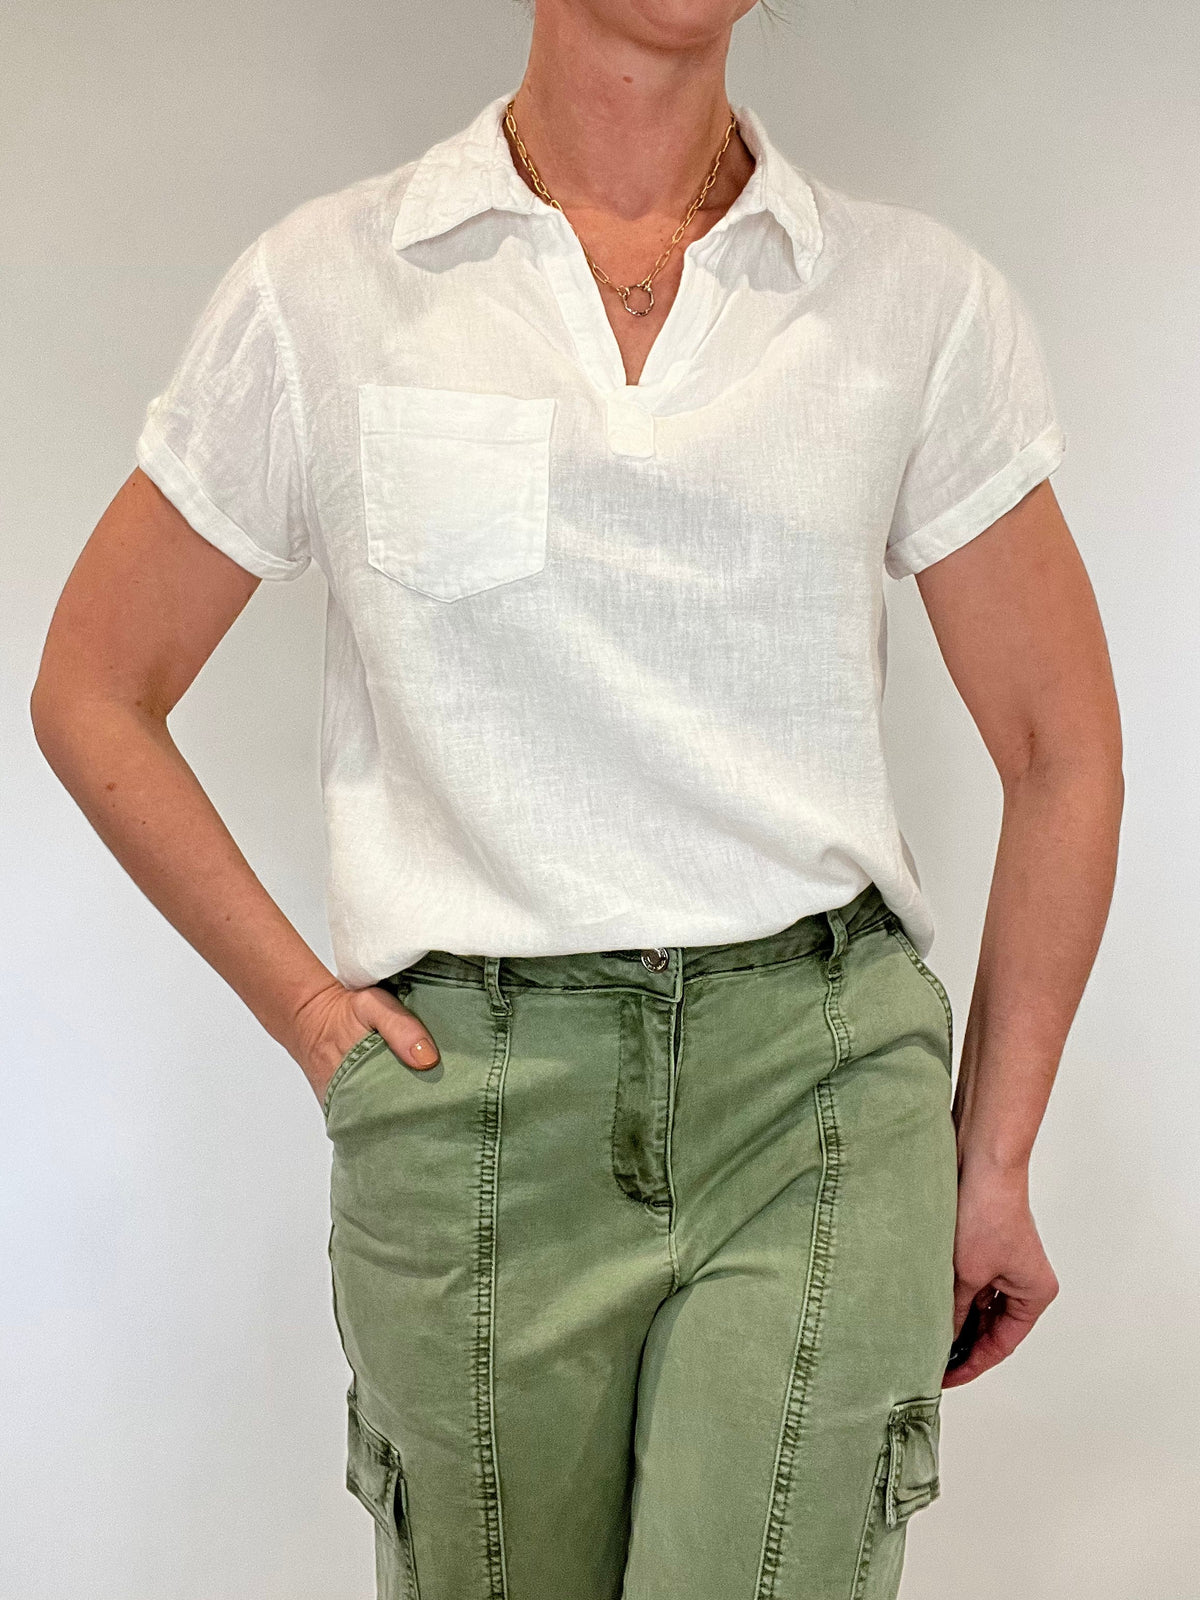 Linen blend perfection. This is your go to everything white top; layer it under a jacket, pair with pants or shorts, dress it up or dress it down but know that however you style this top you will look and feel put together.